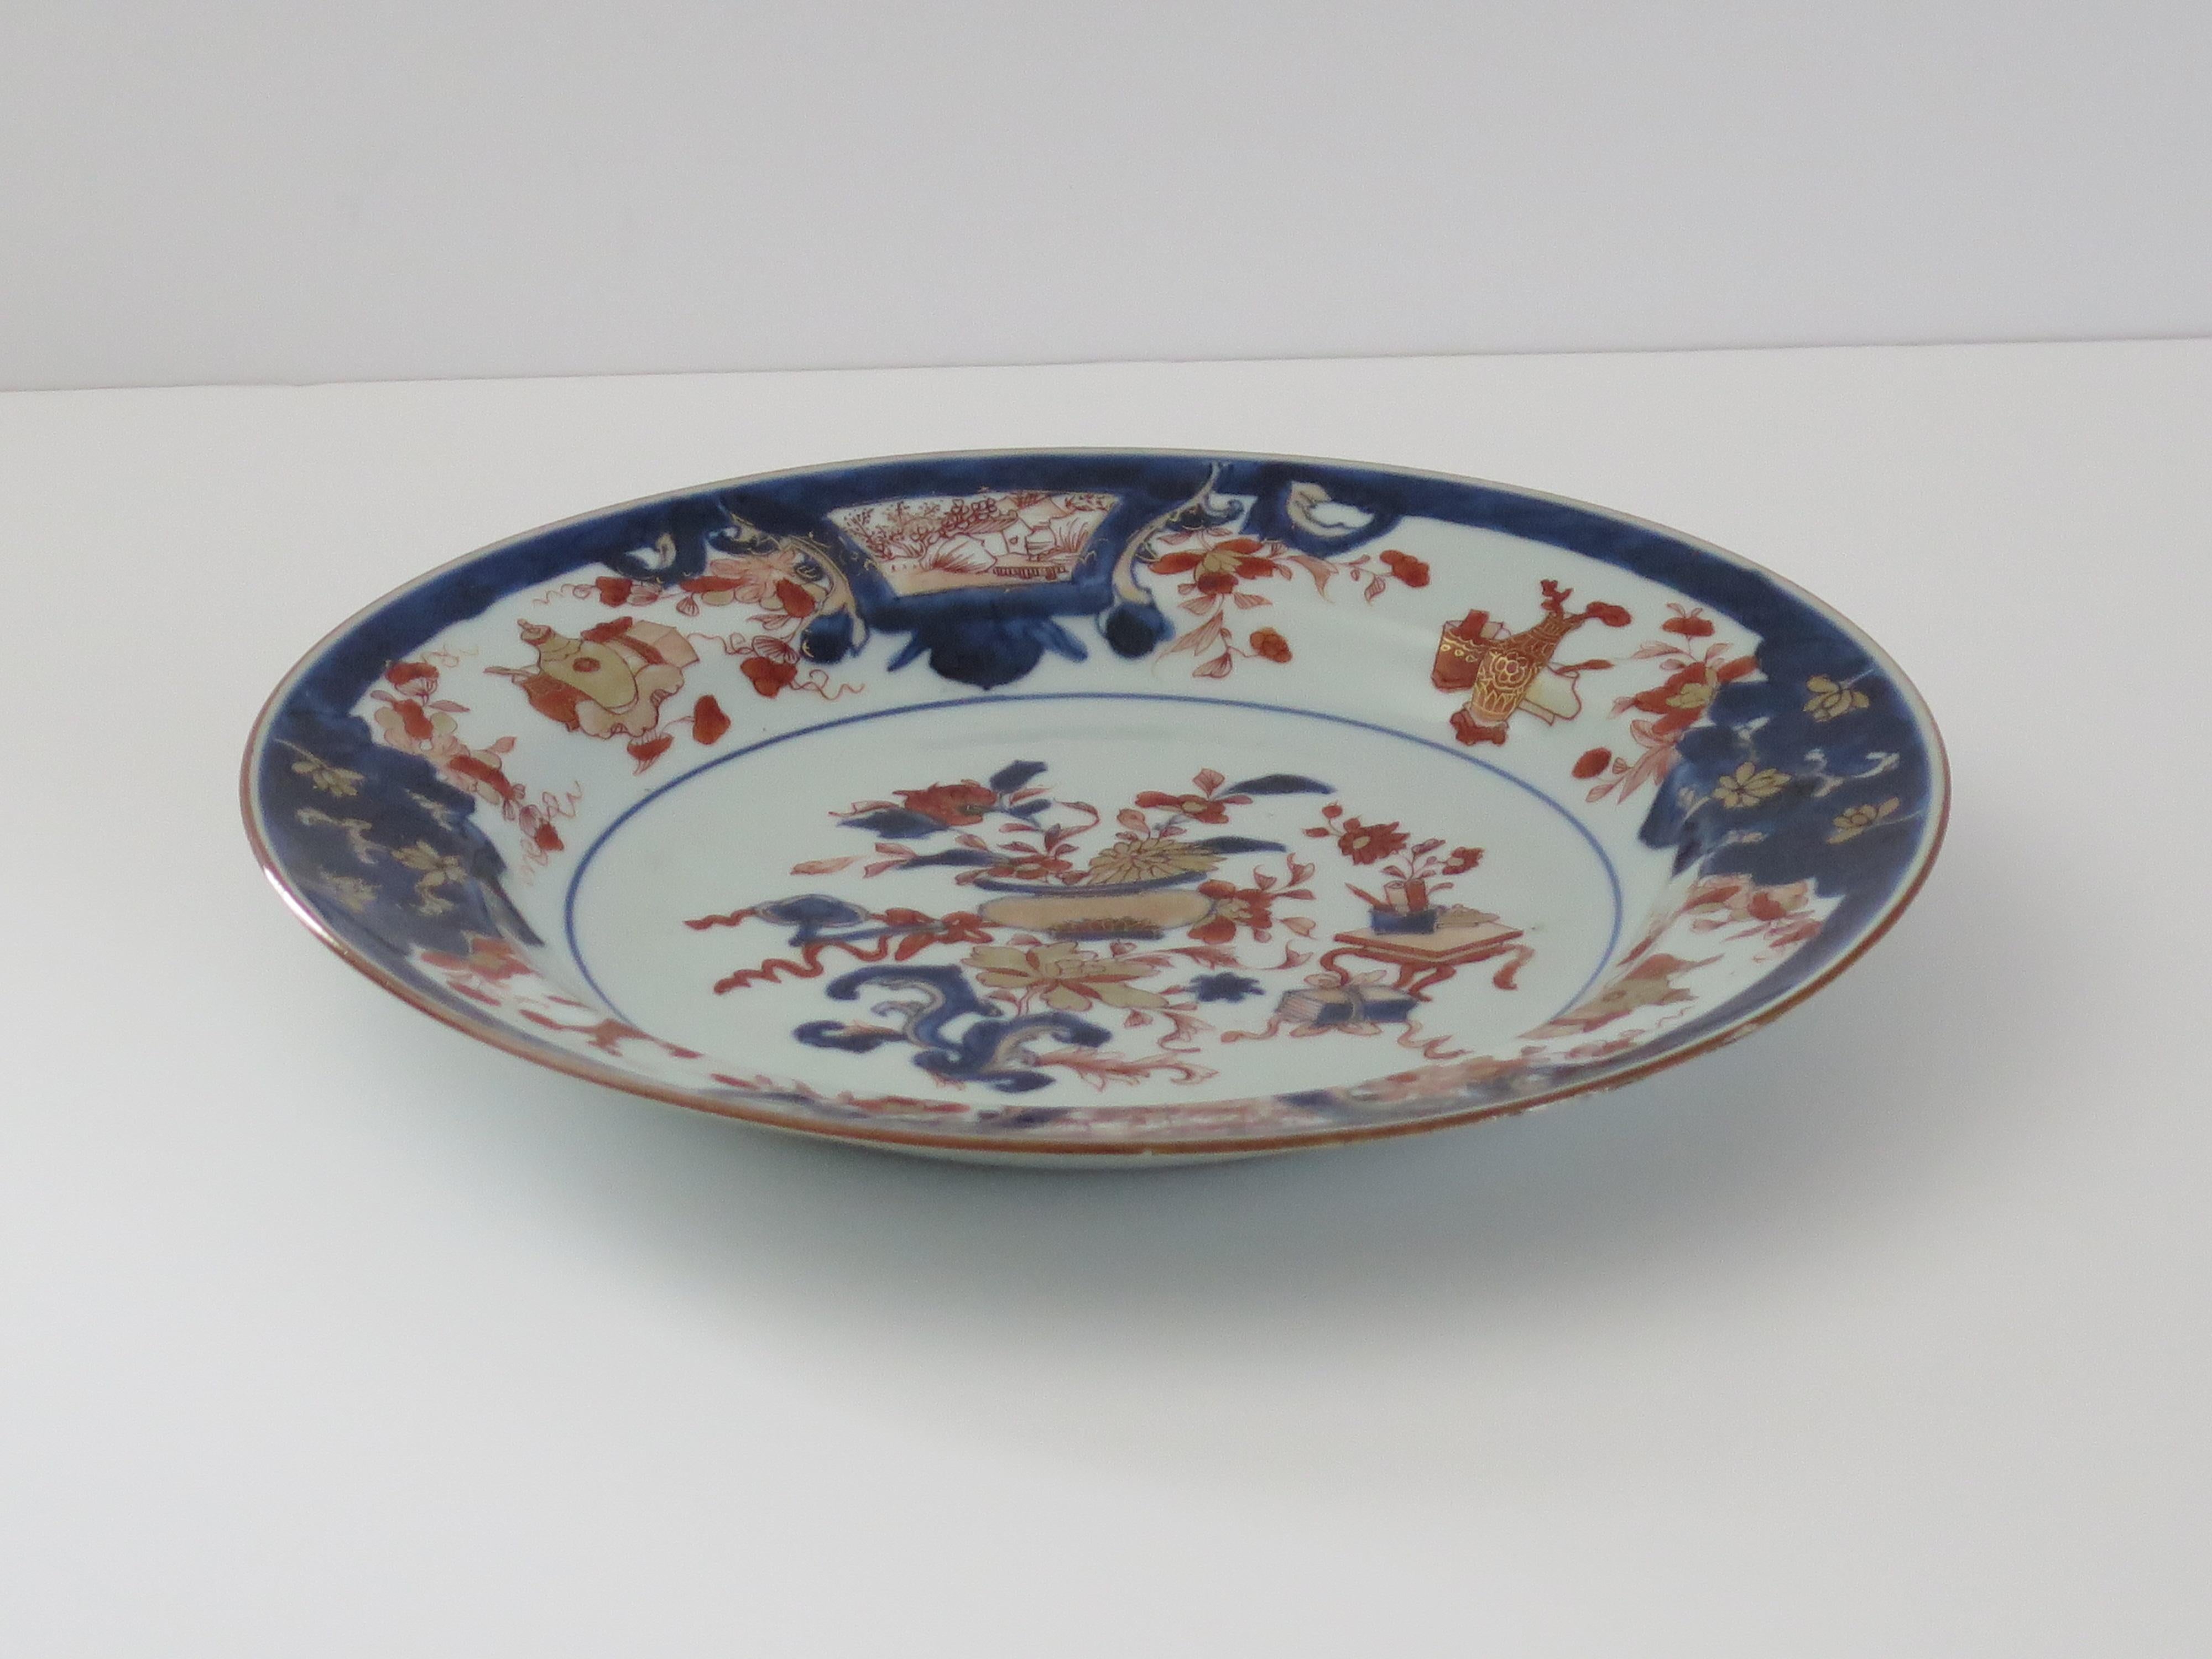 This is a beautifully hand painted Chinese Export porcelain Plate from the Qing, Kangxi period, (1662-1722), circa 1700. 

The plate is of large dinner plate size with a 10 inch diameter. It is finely potted with a carefully cut base rim and a